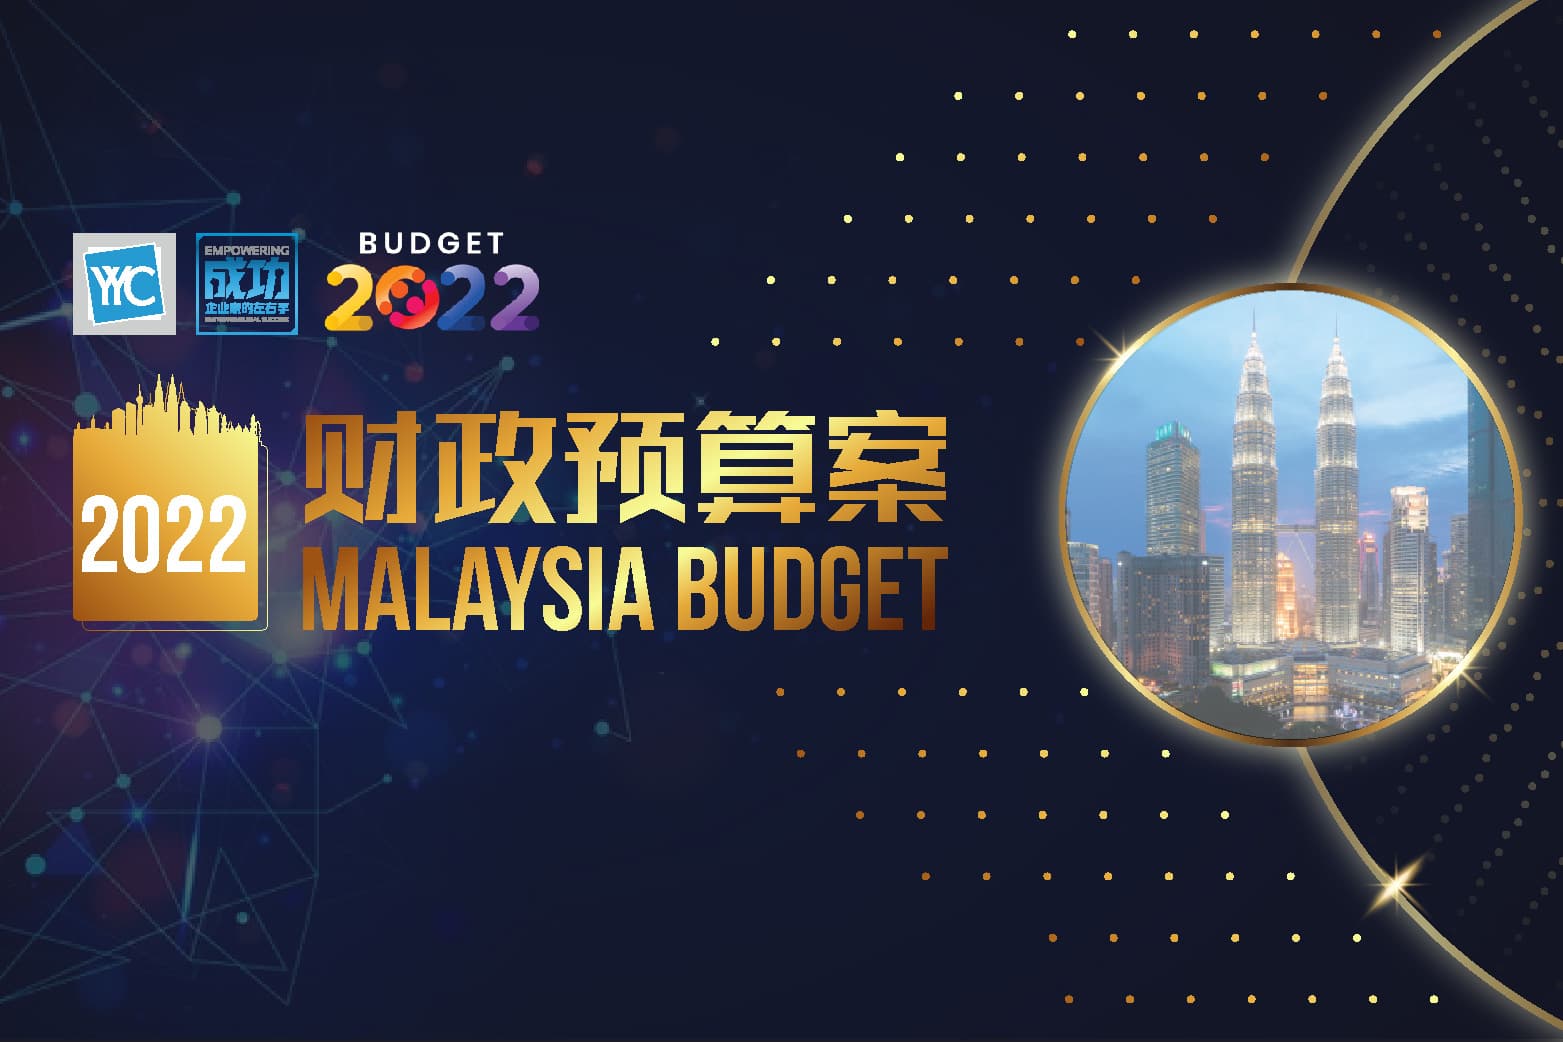 The government on Friday announced an RM332.1 billion expansionary Budget for 2022, the highest allocation compared with previous budgets.  